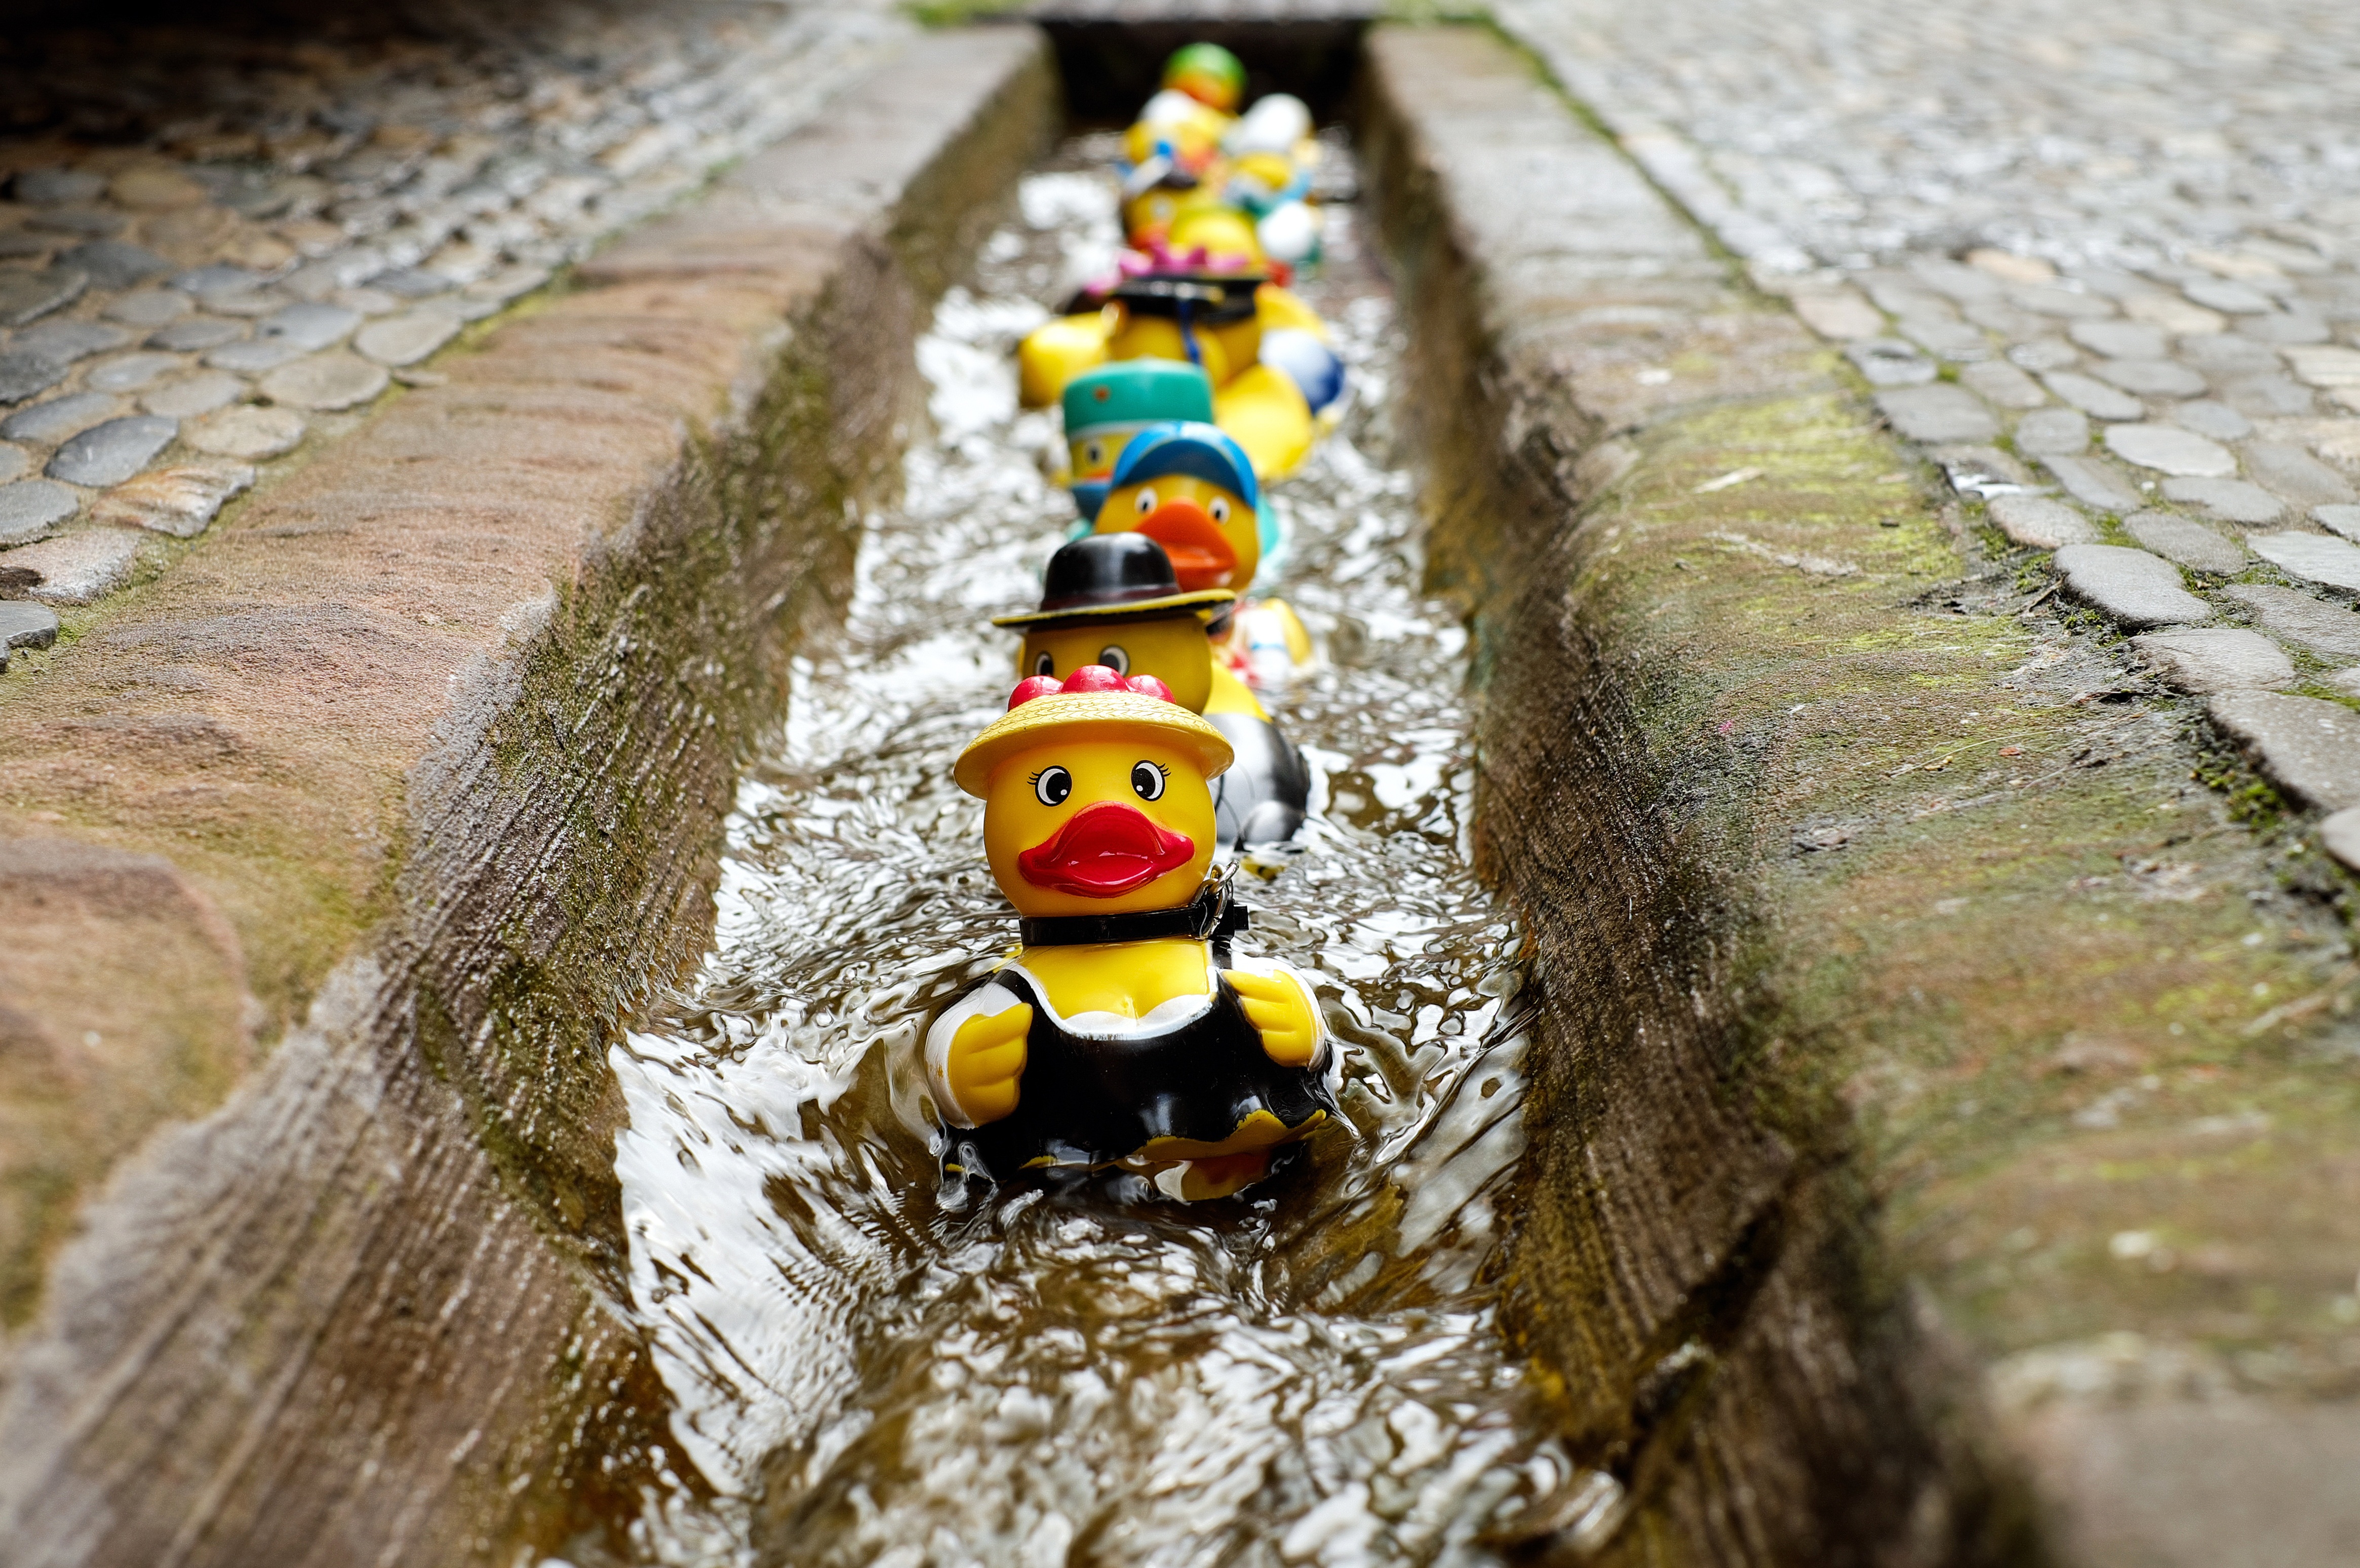 Rubber ducks floating down the water in the summer